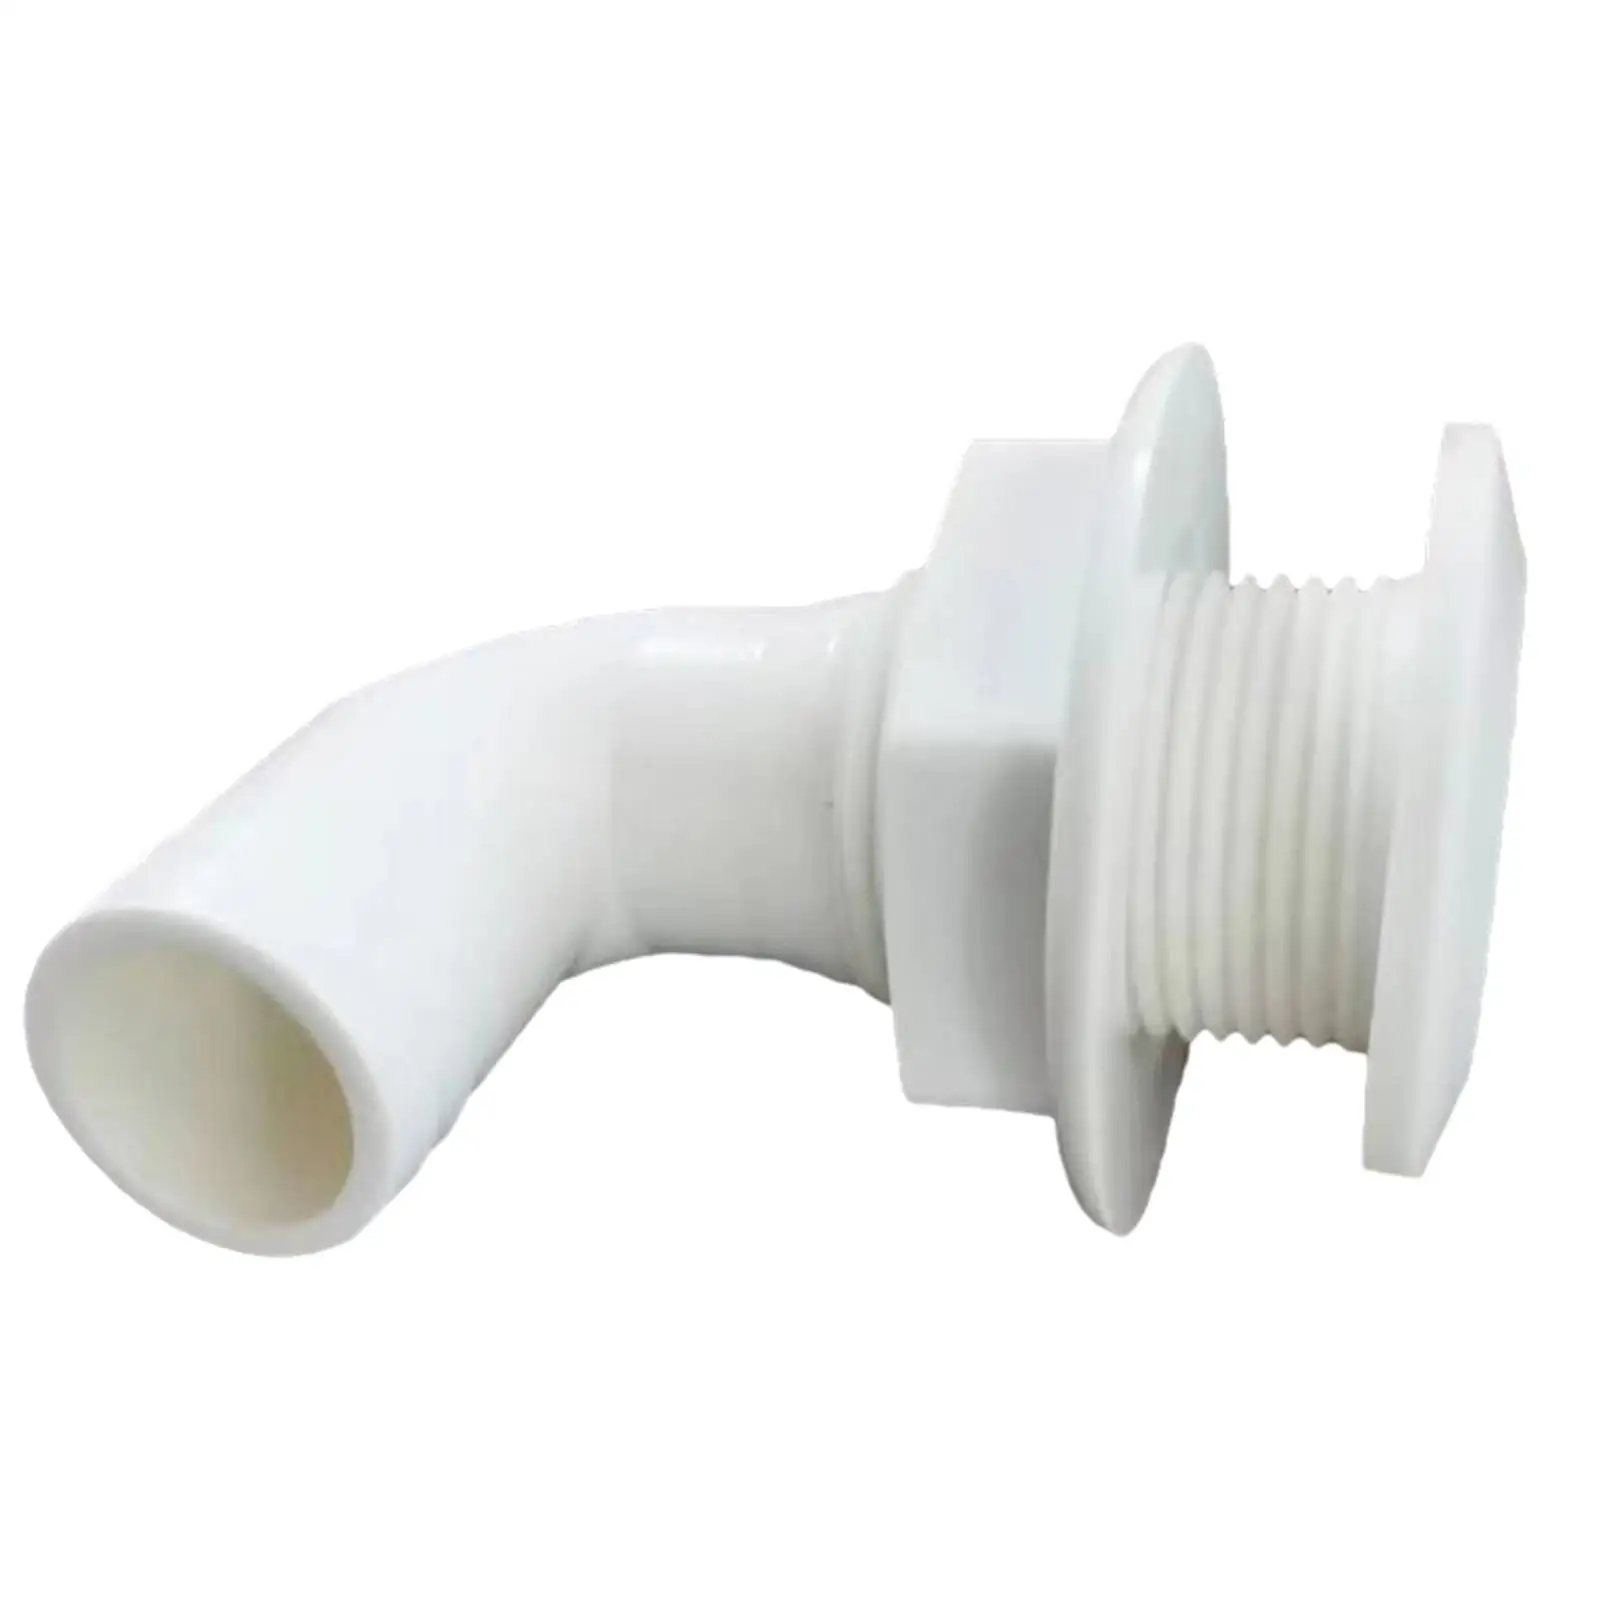 90 Degree thru Hull Fitting White PP Boat Plumbing for Spare Parts Easily Install Professional Direct Replacement Premium